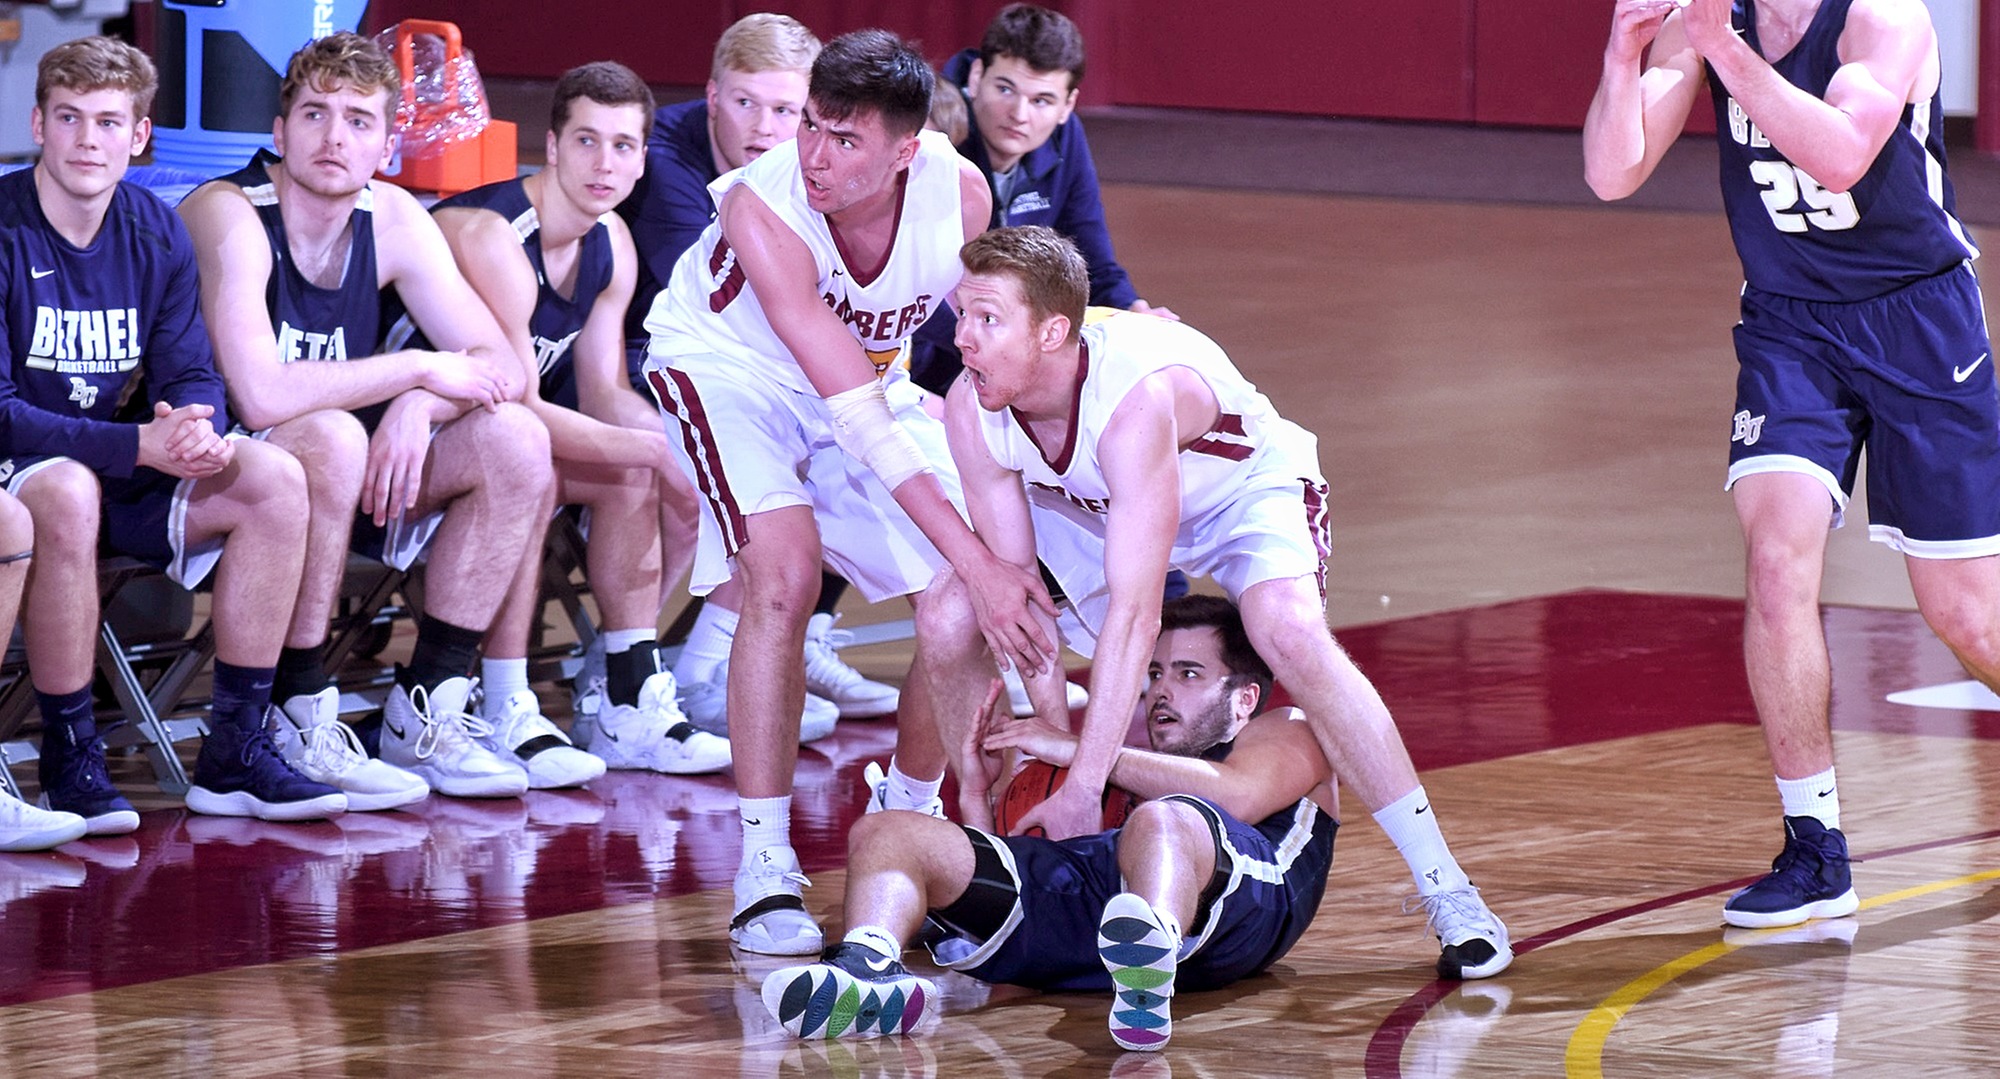 Seniors Collin Larson and Jordan Davis fight for a loose ball in the Cobbers' game with Bethel.